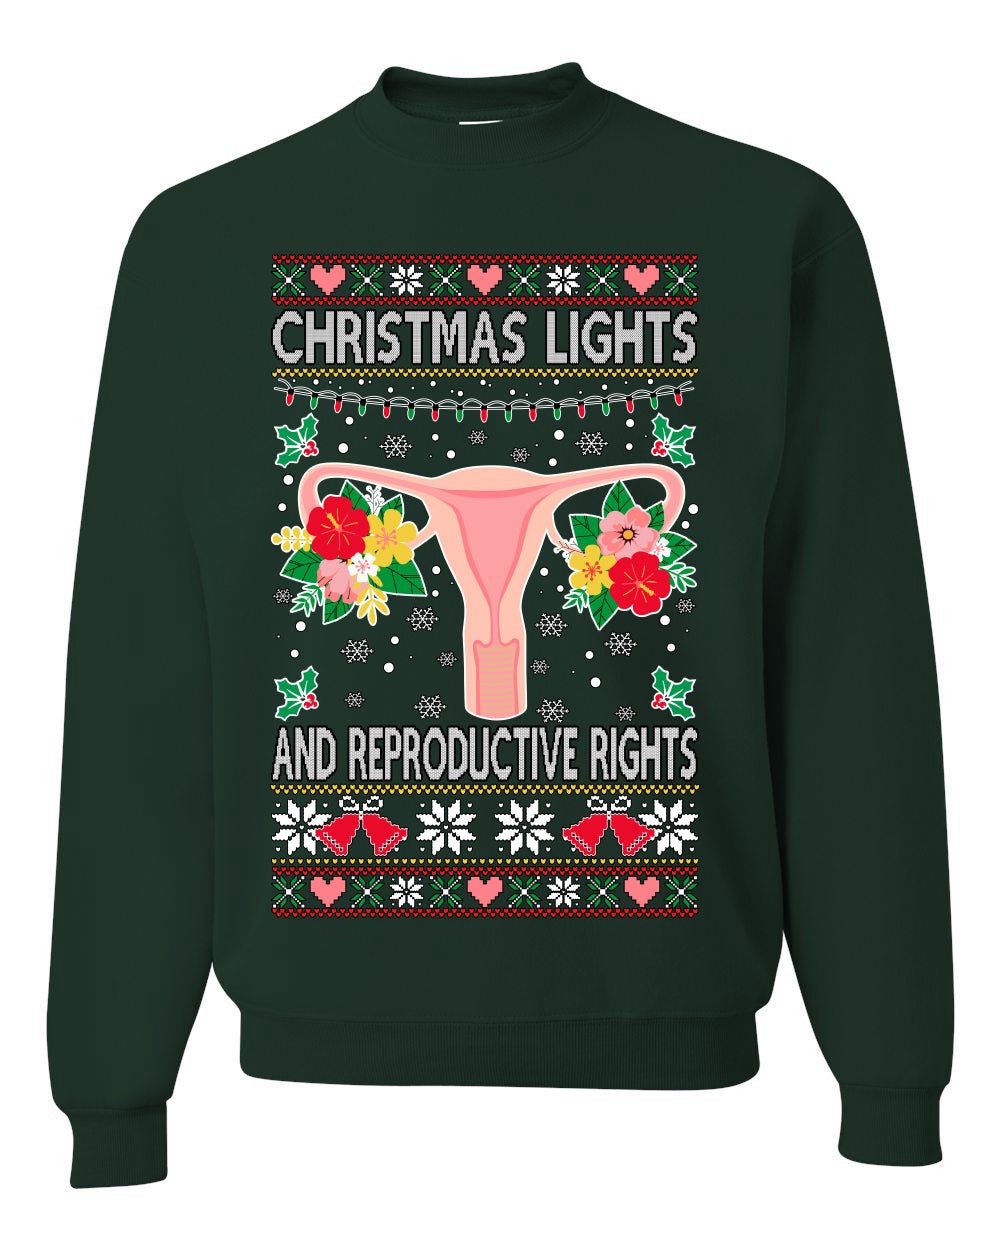 Discover Christmas Lights & Reproductive Rights Ugly Christmas Sweater Unisex Crewneck Graphic Sweatshirts